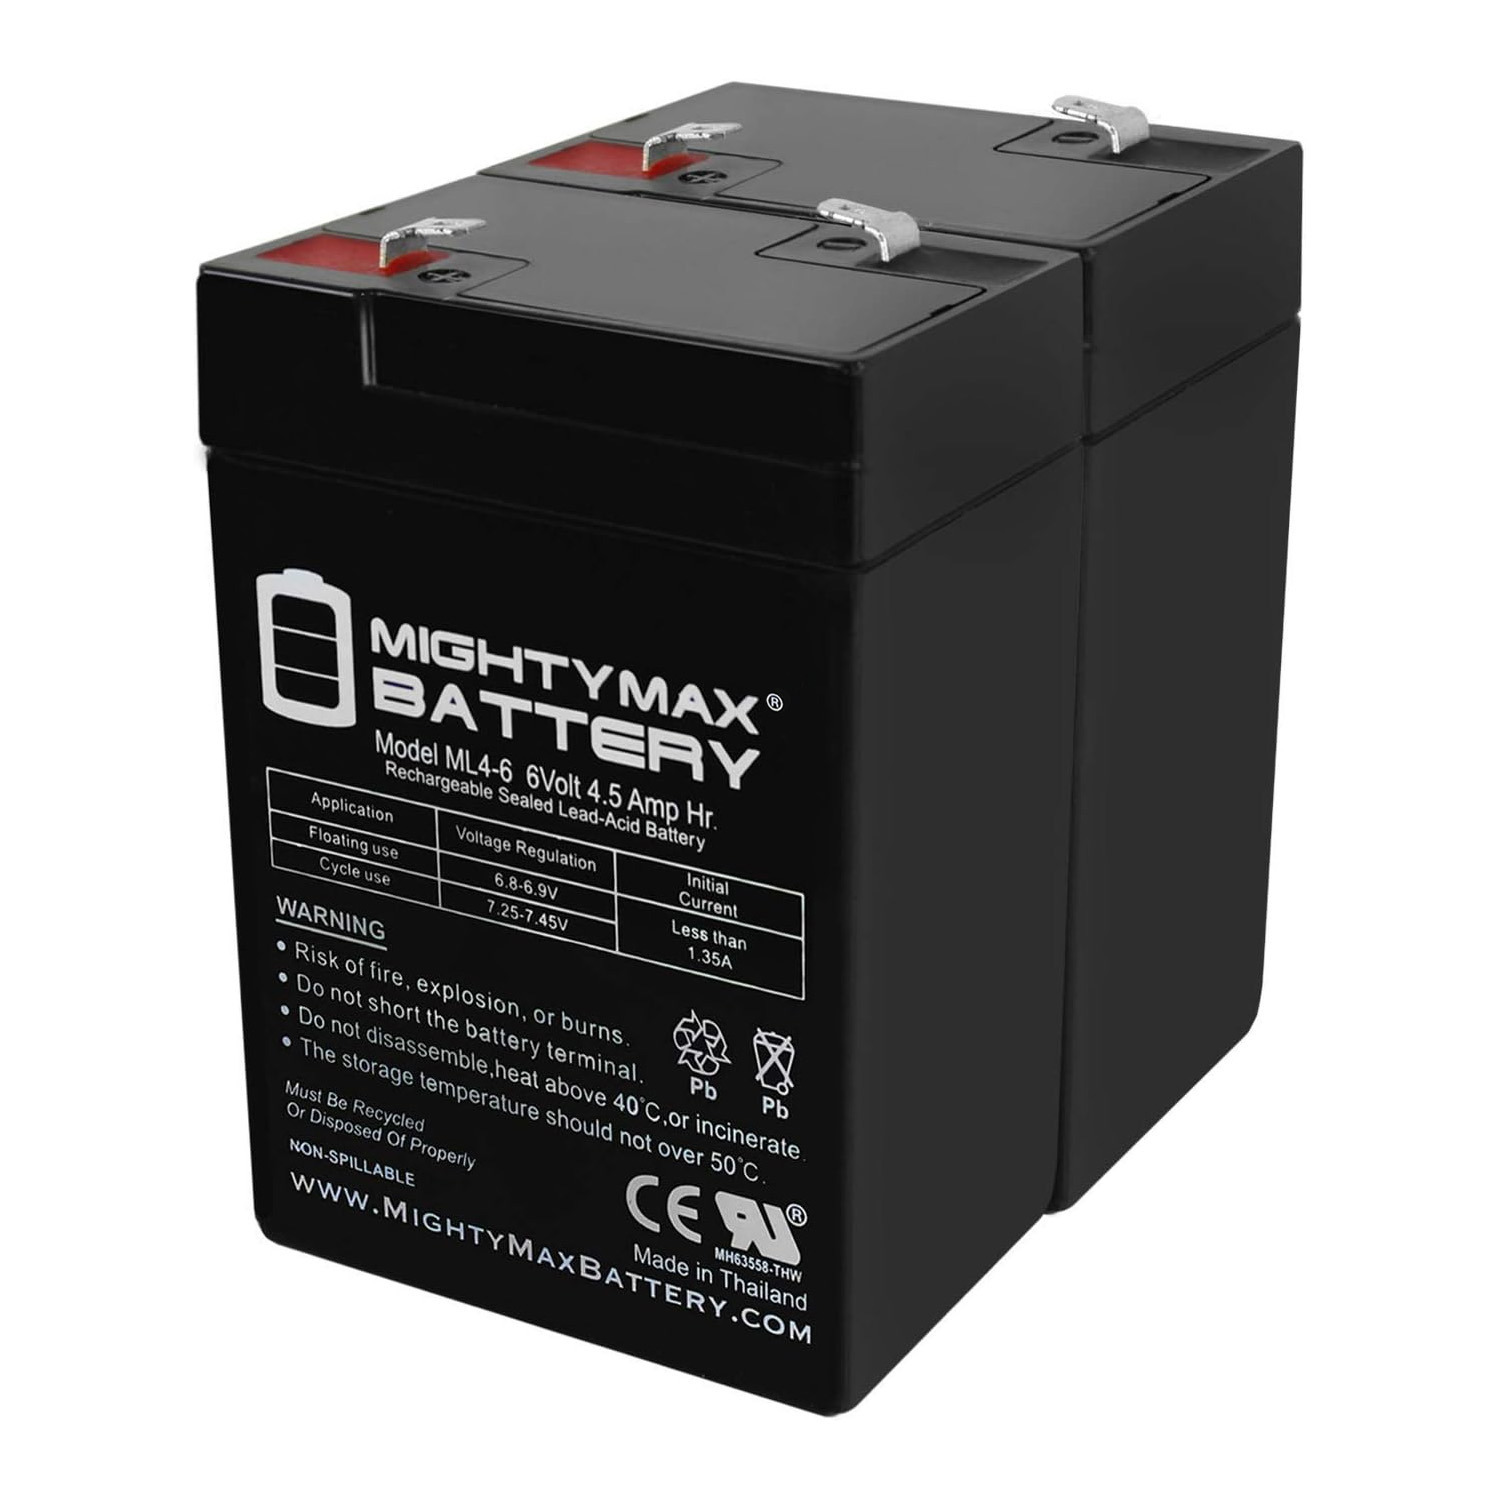 6V 4.5AH SLA Replacement Battery for Dual-Lite AGM HCXURB - 2 Pack